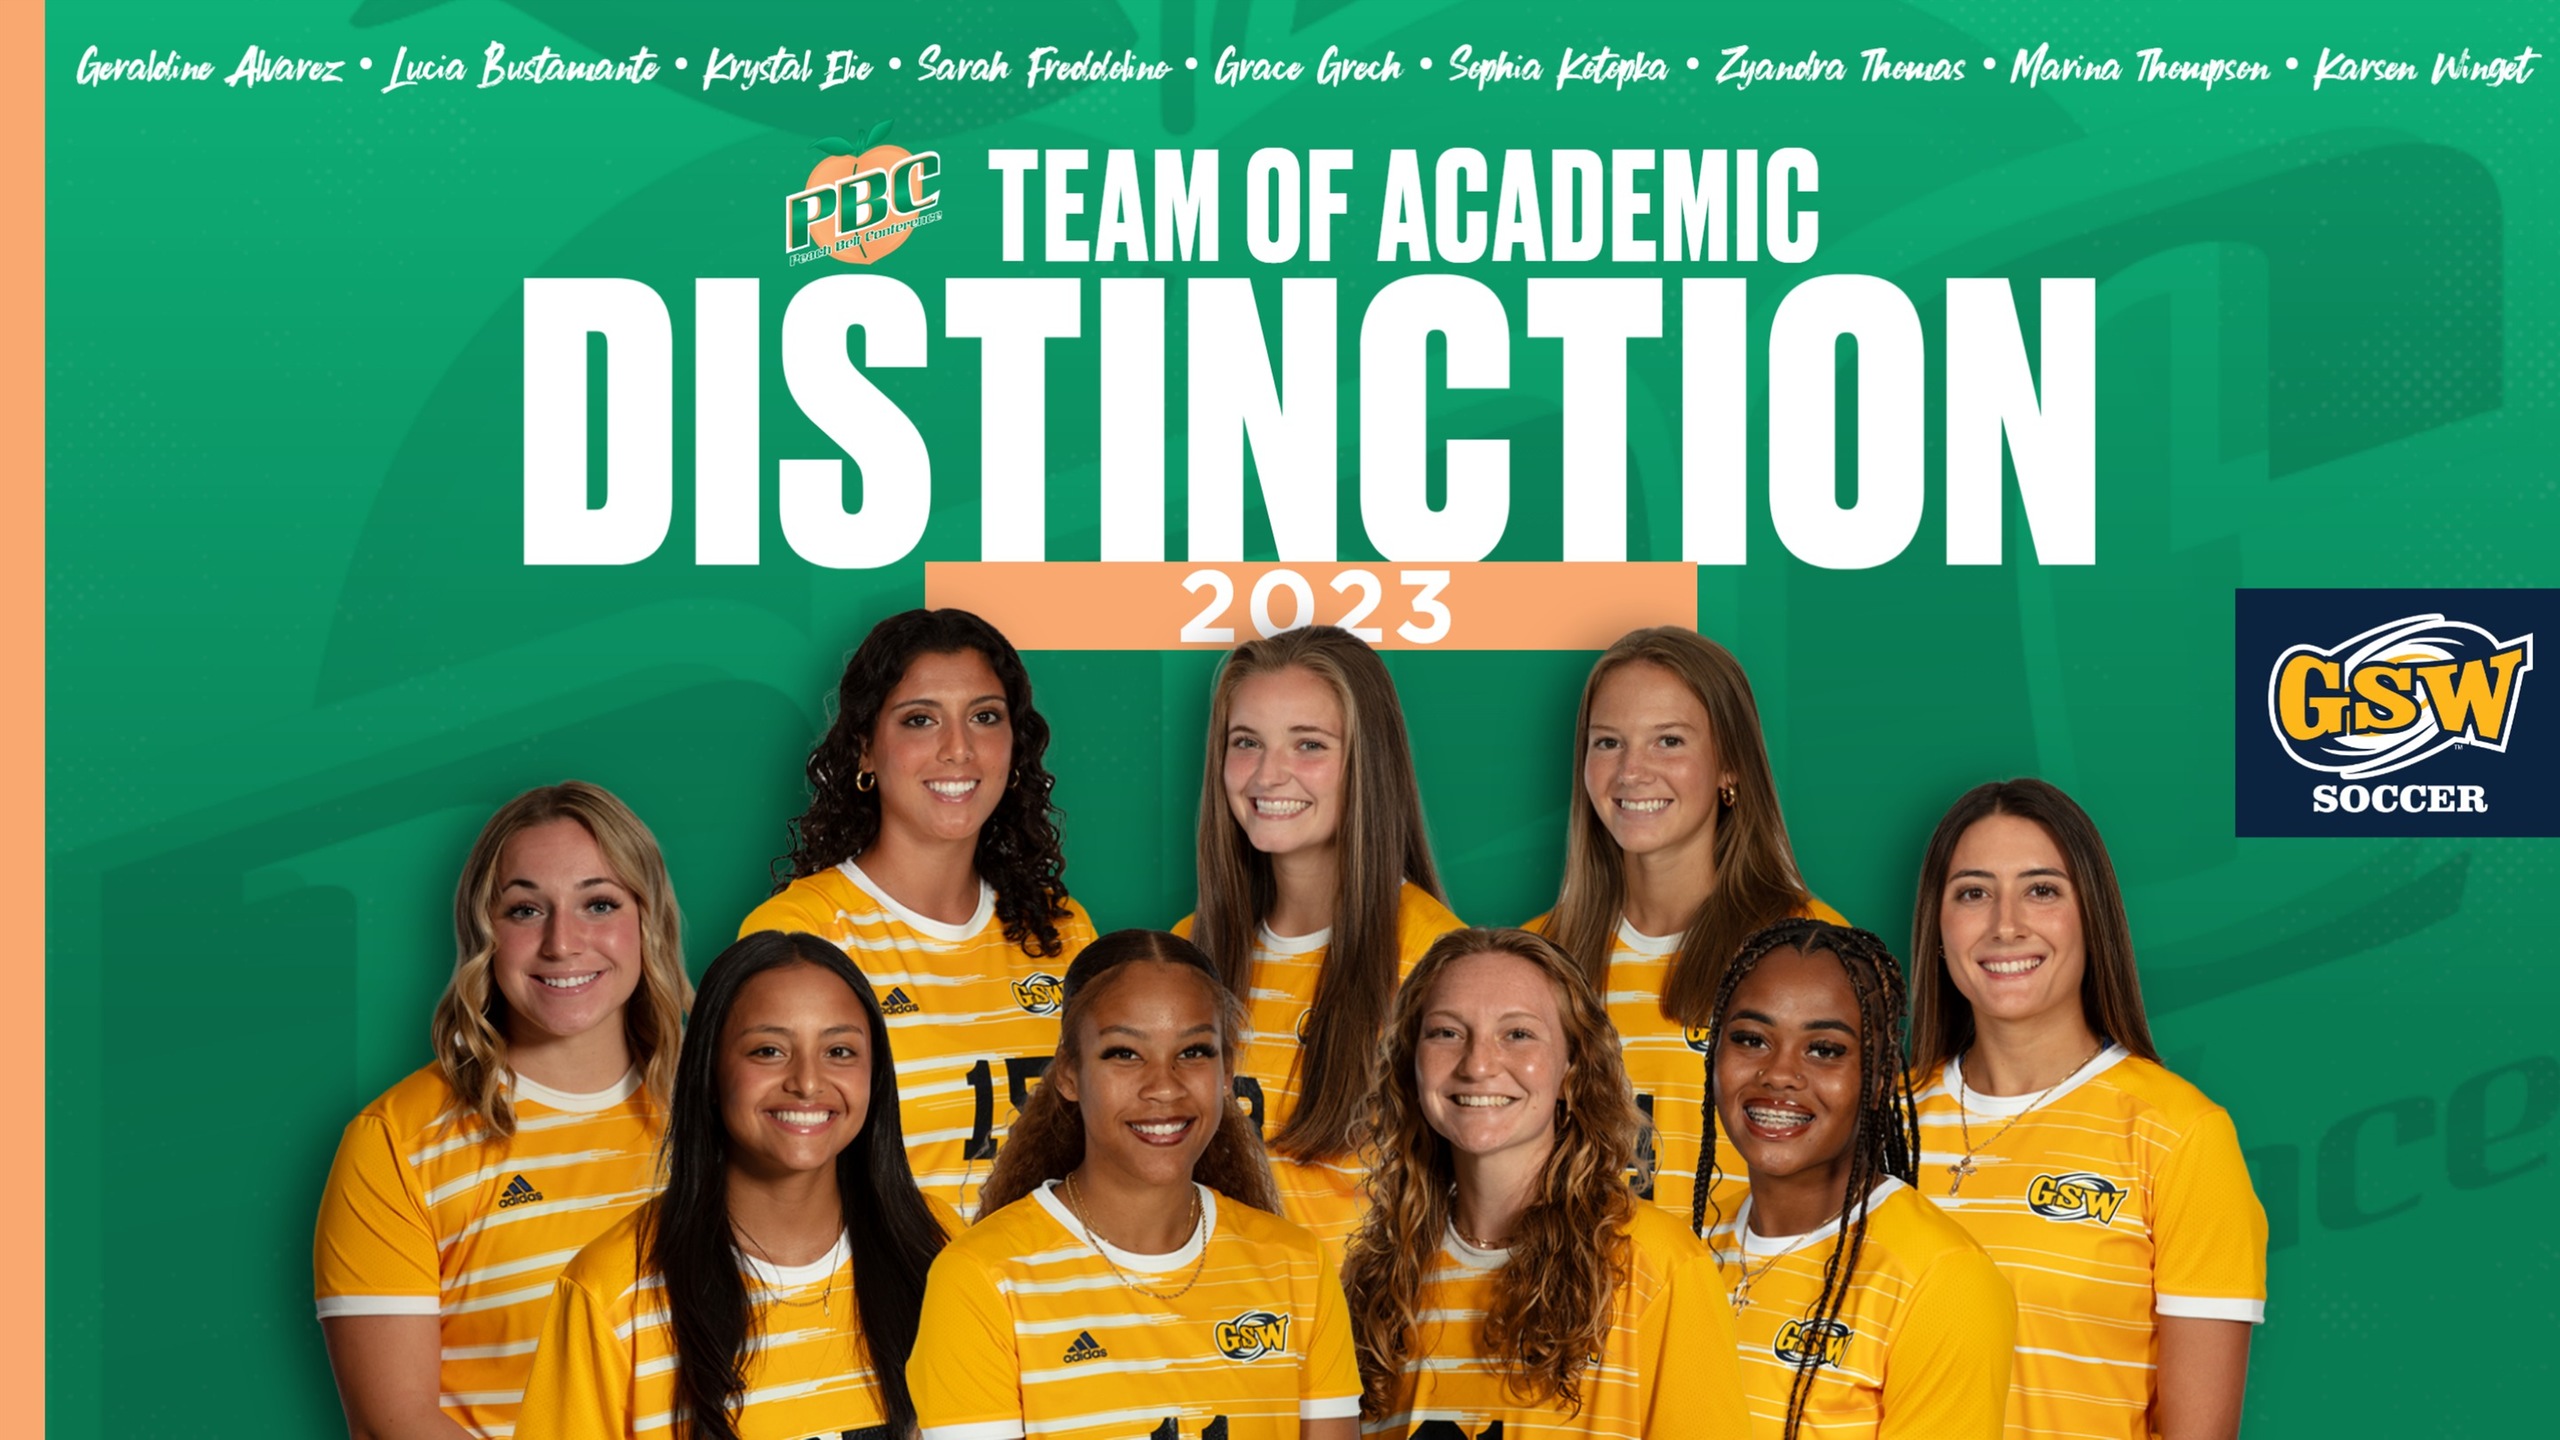 Record Nine Lady Canes Named to PBC Team of Academic Distinction